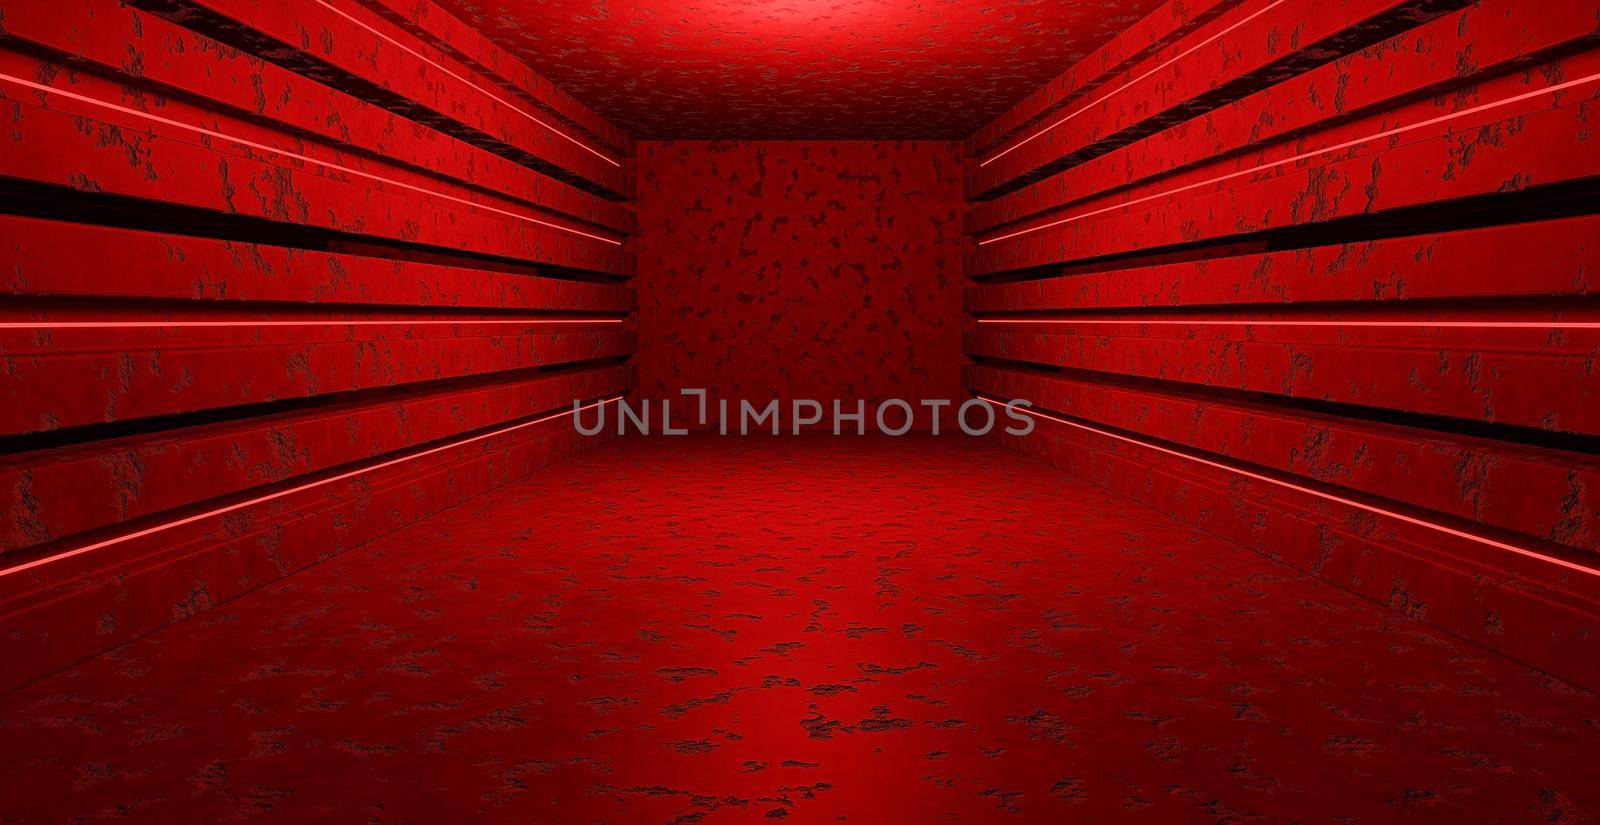 Futuristic Science Fiction Concrete Cement Wall Floor Underground Tunnel Dimmed Red Abstract Background With Space For Products 3D Illustration by yay_lmrb